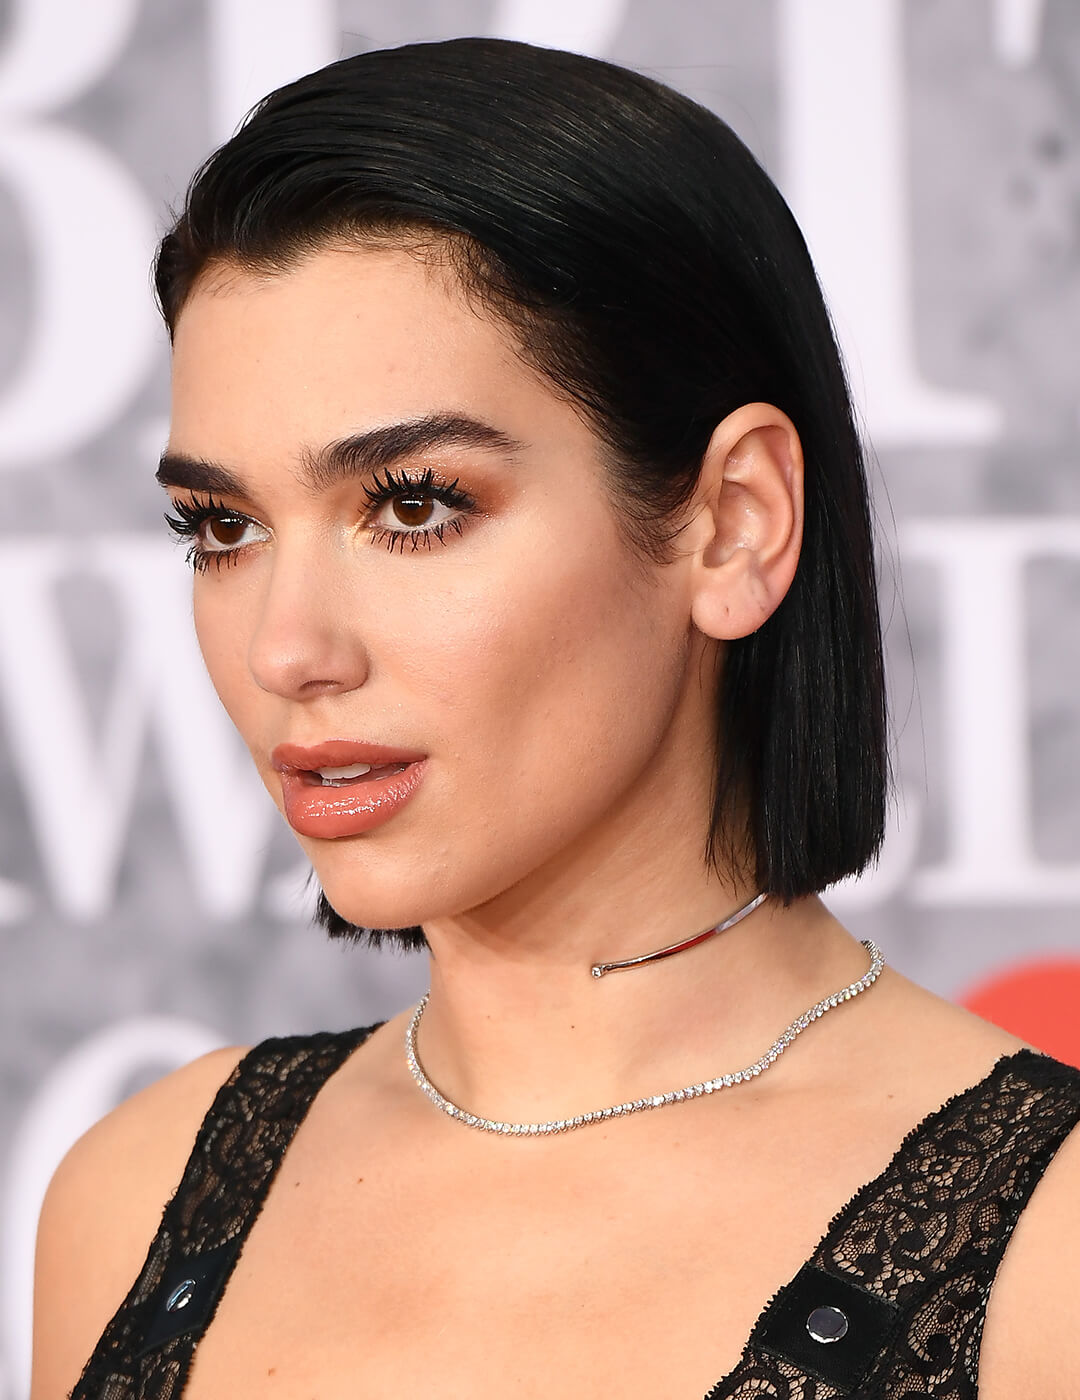 Dua Lipa rocking a blunt bob hairstyle and neutral makeup look